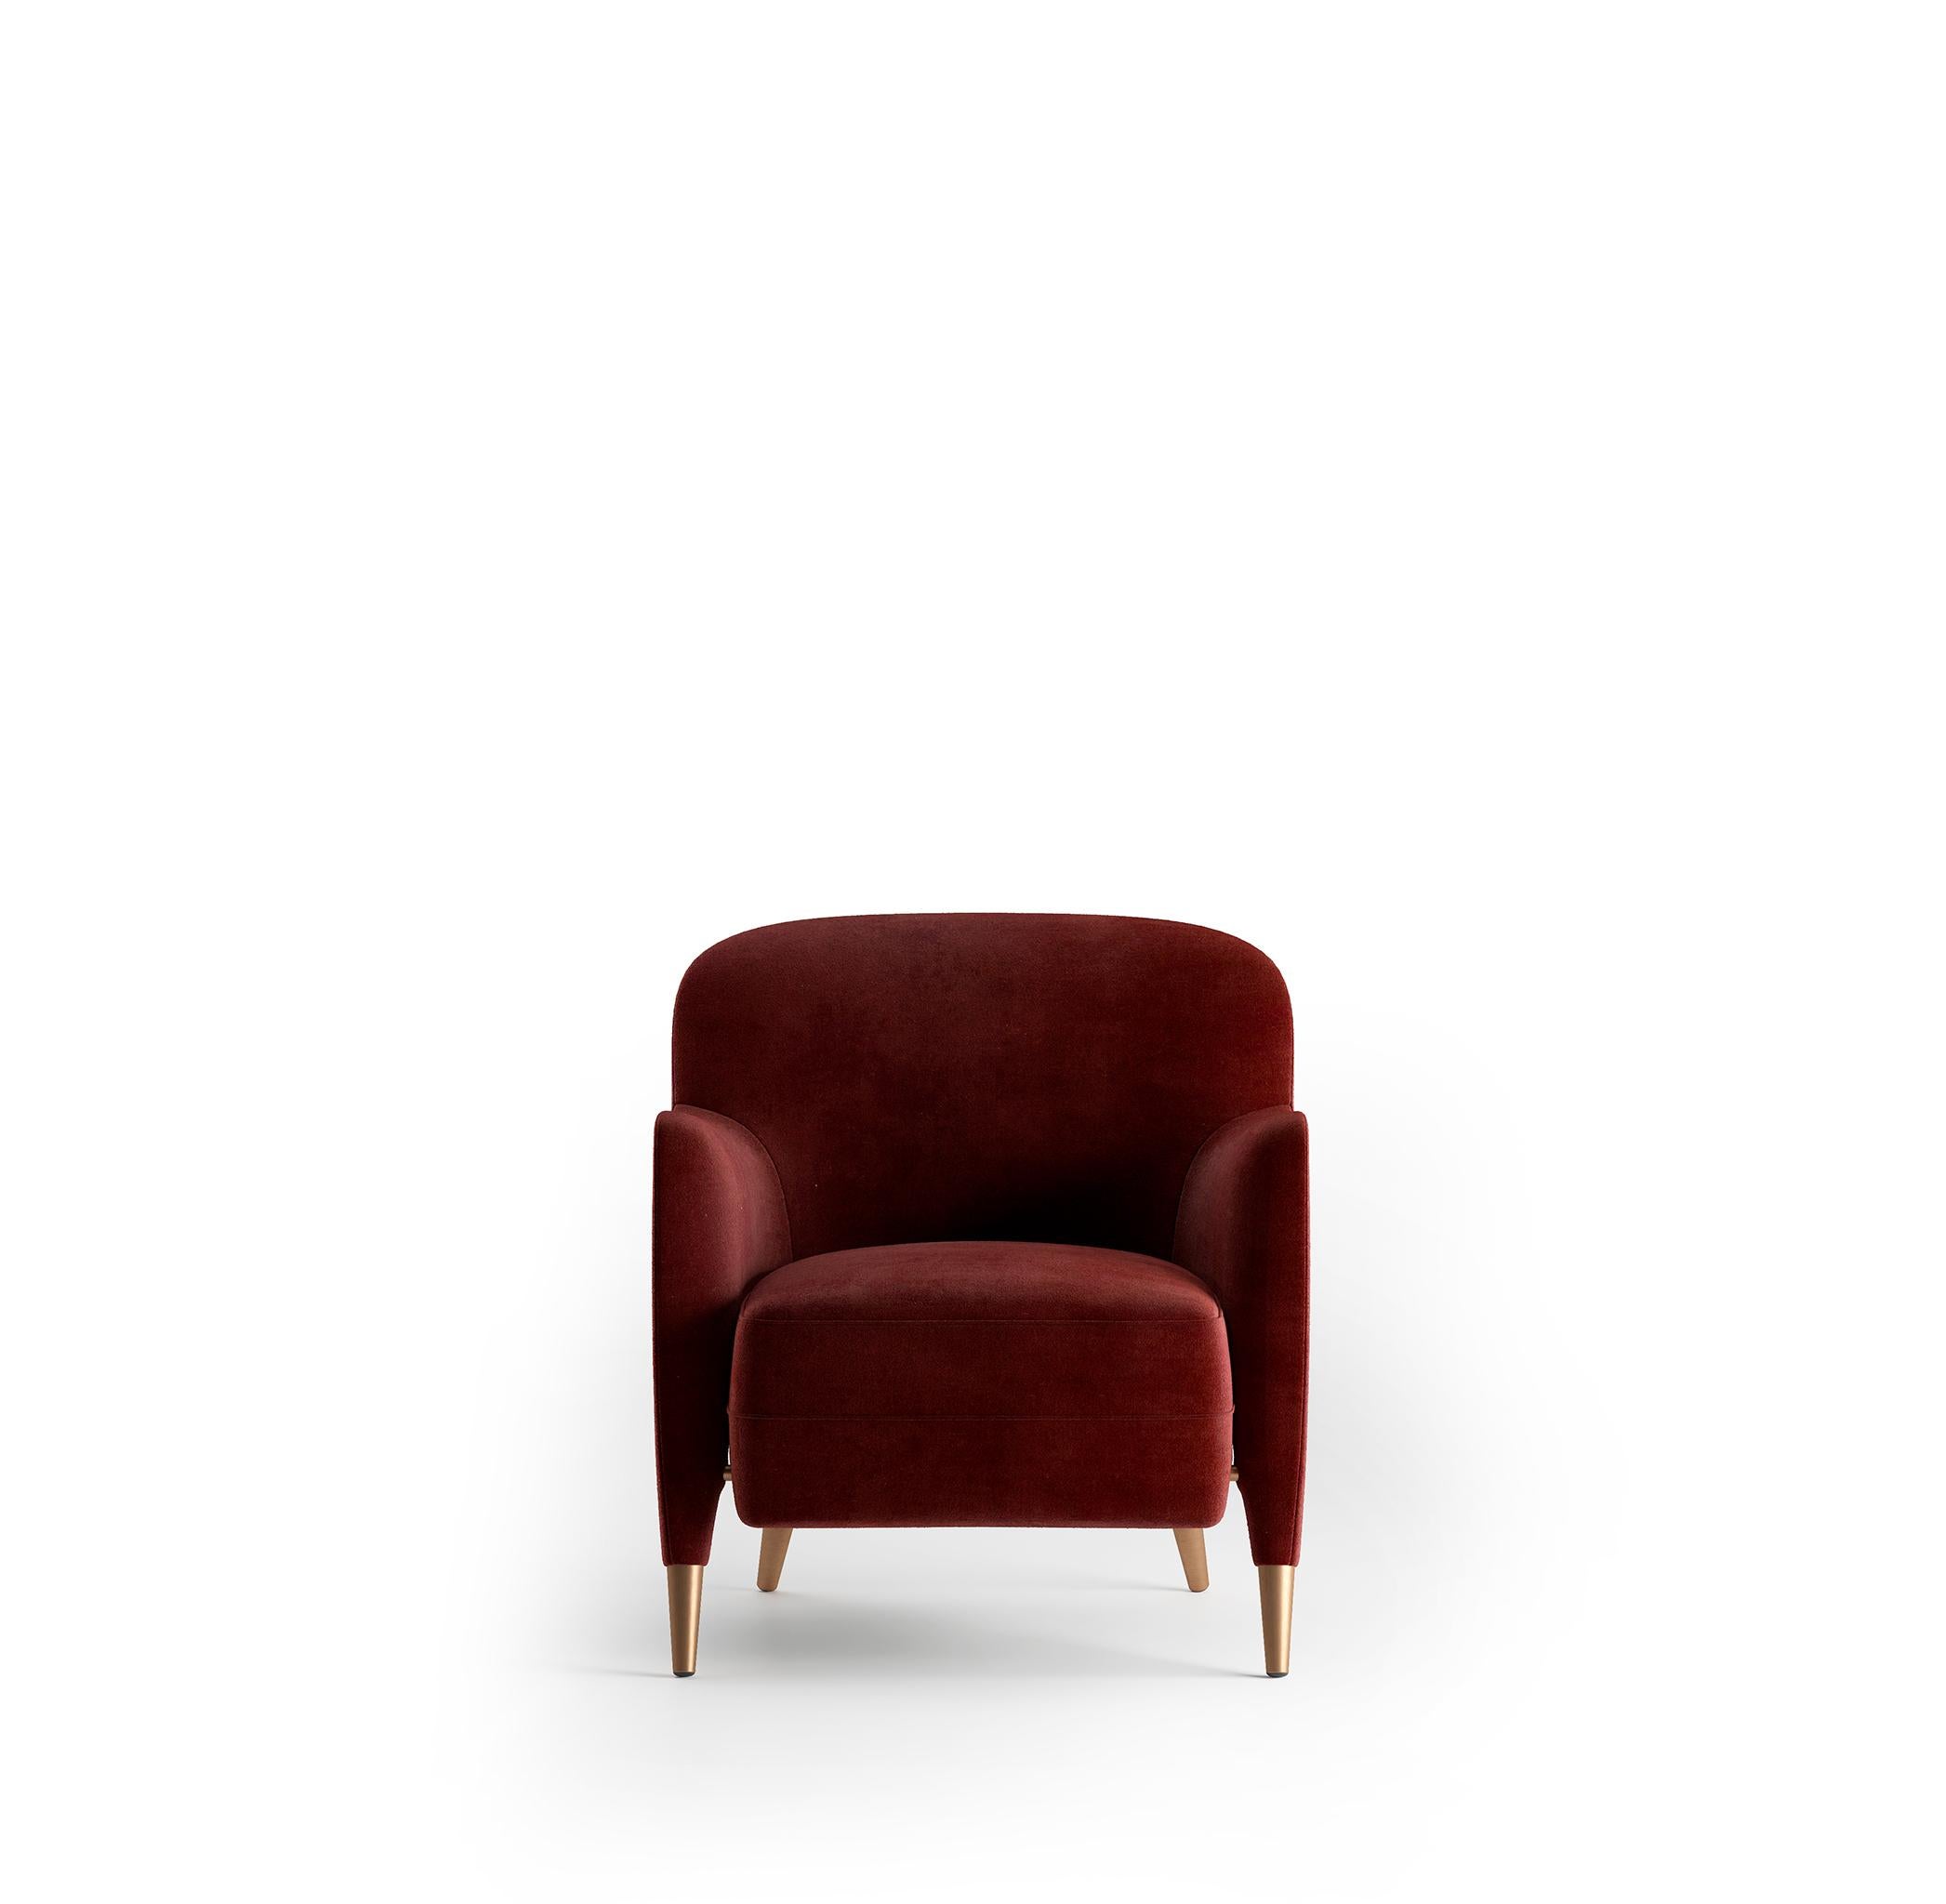 Modern Red Velvet Armchair Molteni&C by Gio Ponti Design D.151.4, Made in Italy For Sale